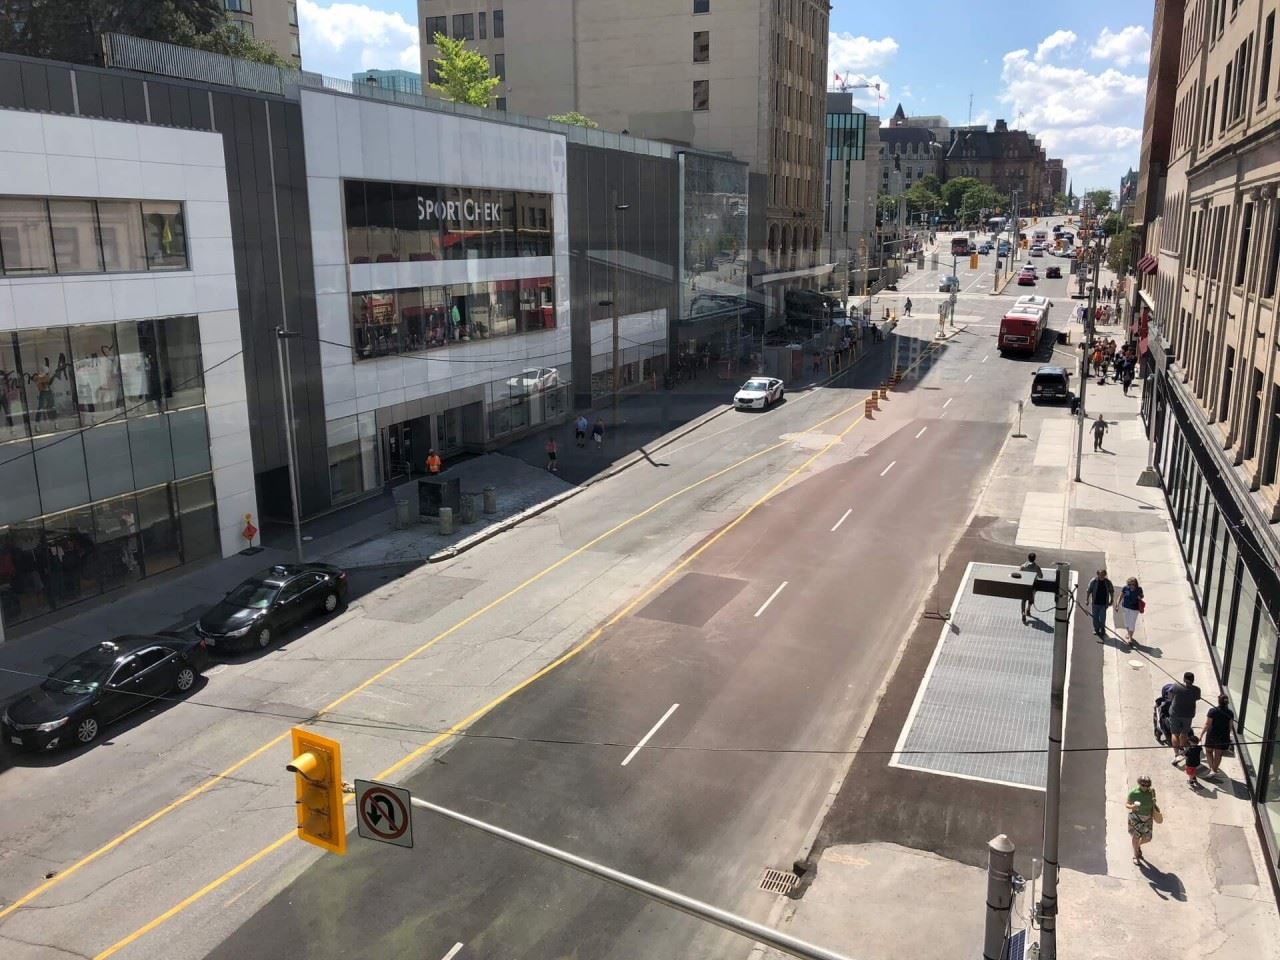 Looking up Rideau towards Wellington Street. Note the large ventilation shaft for the tunnel near the bottom right.